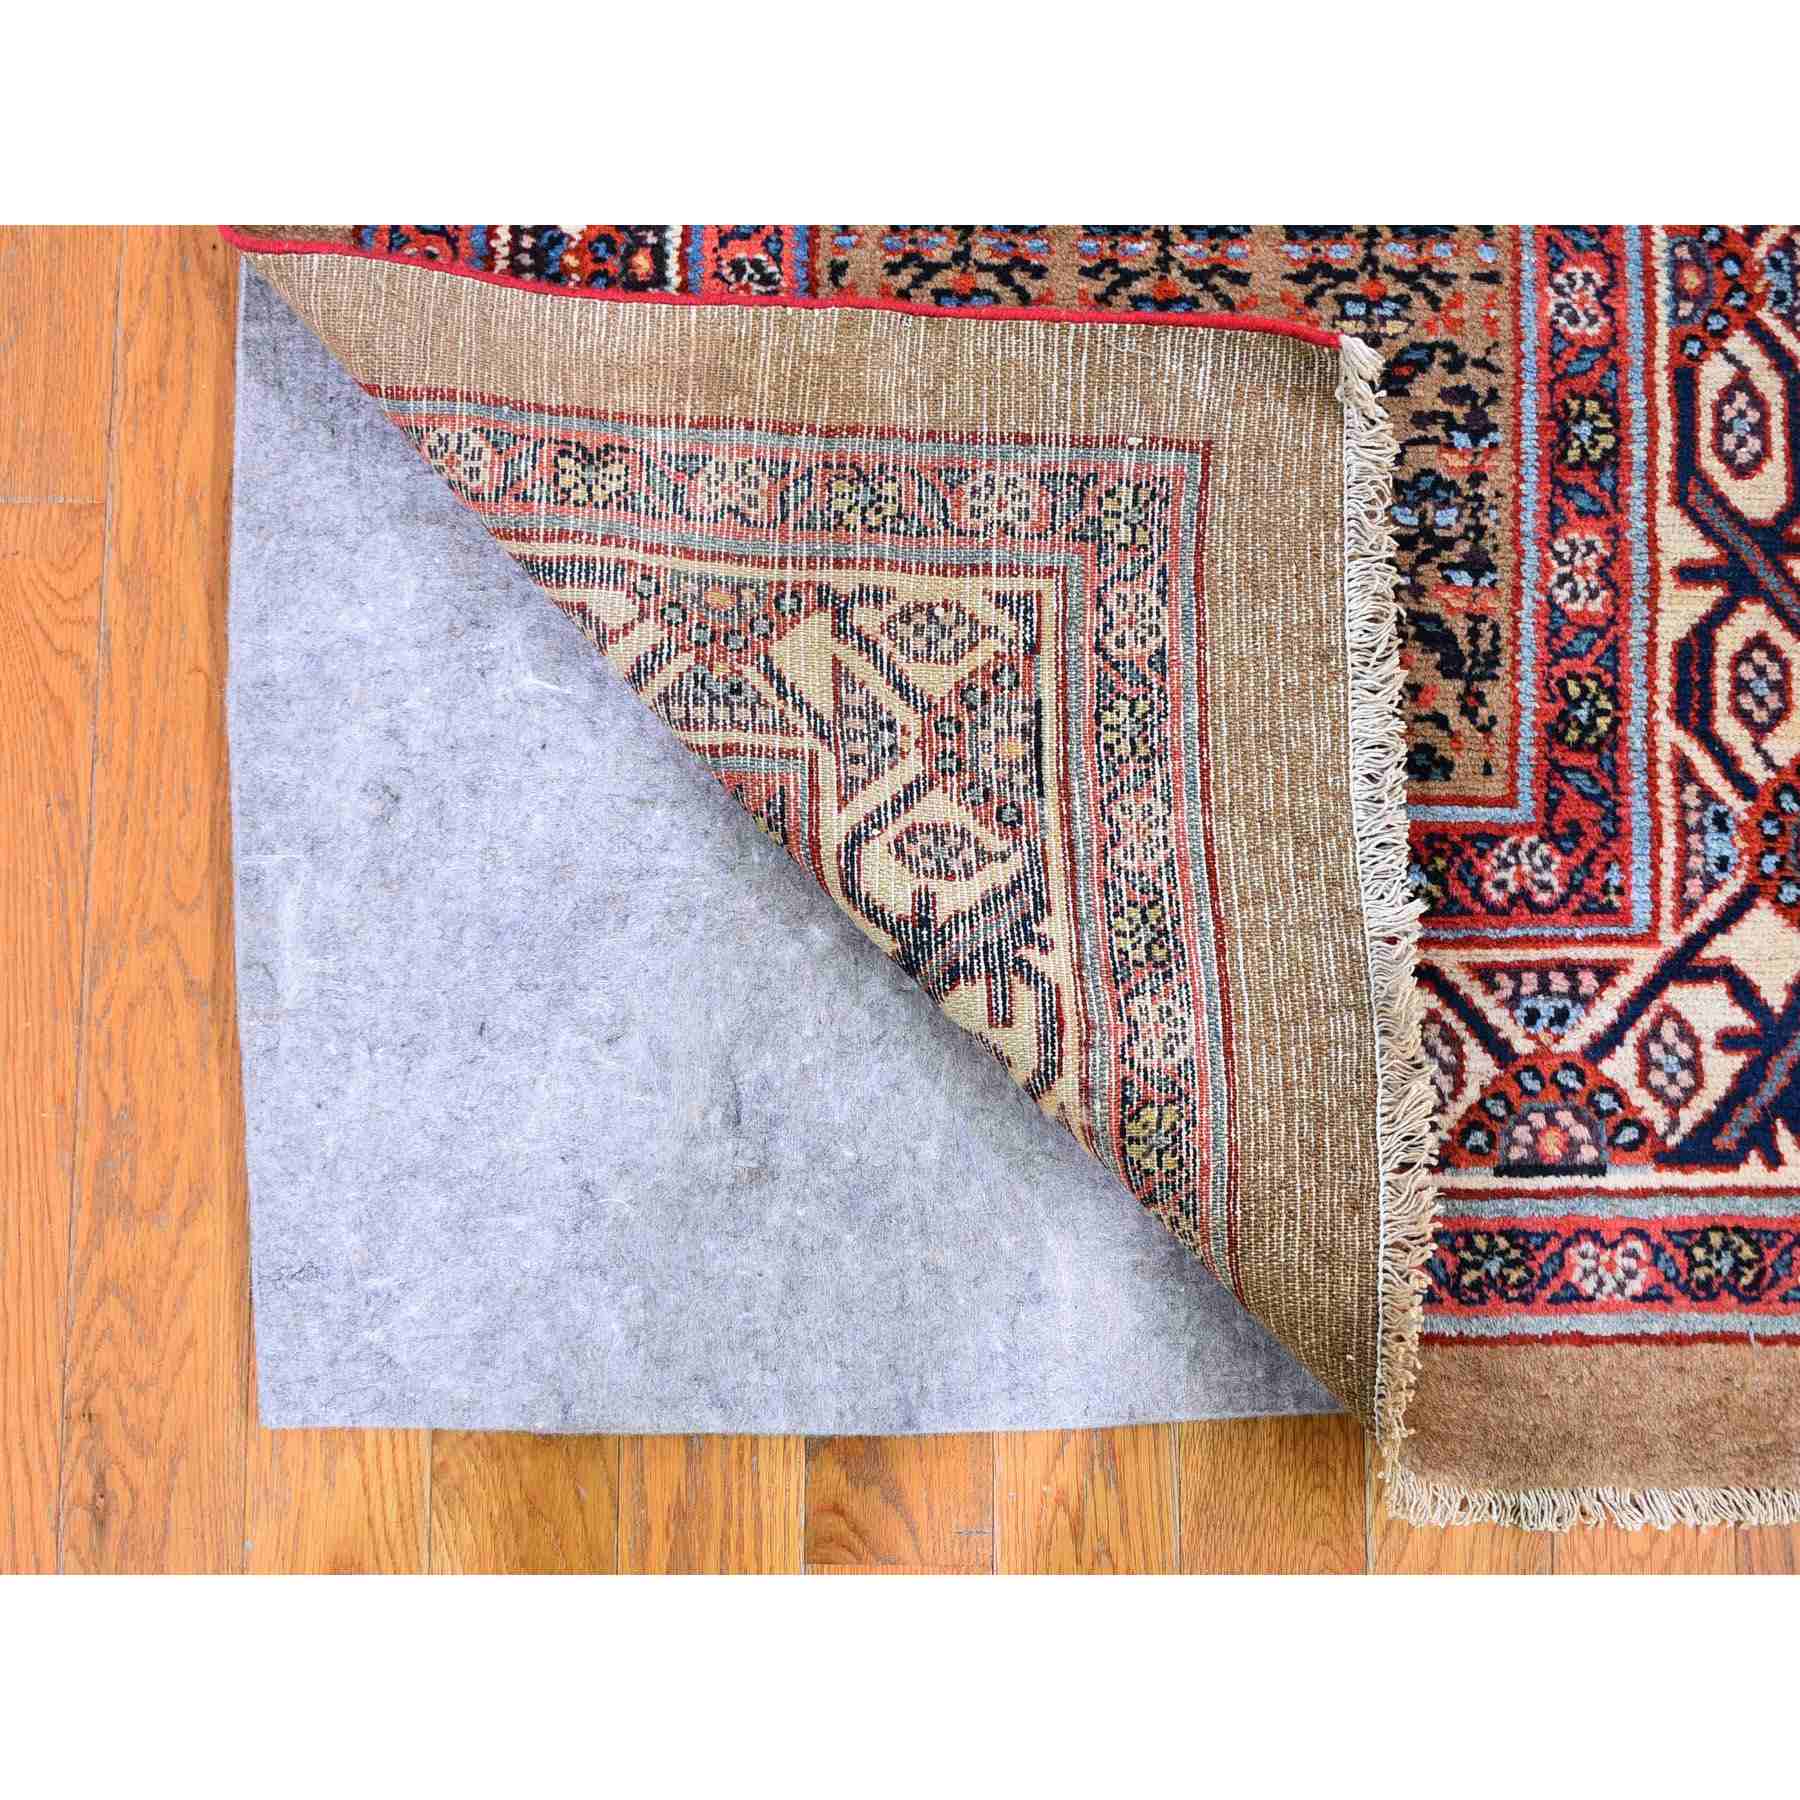 Antique-Hand-Knotted-Rug-297870